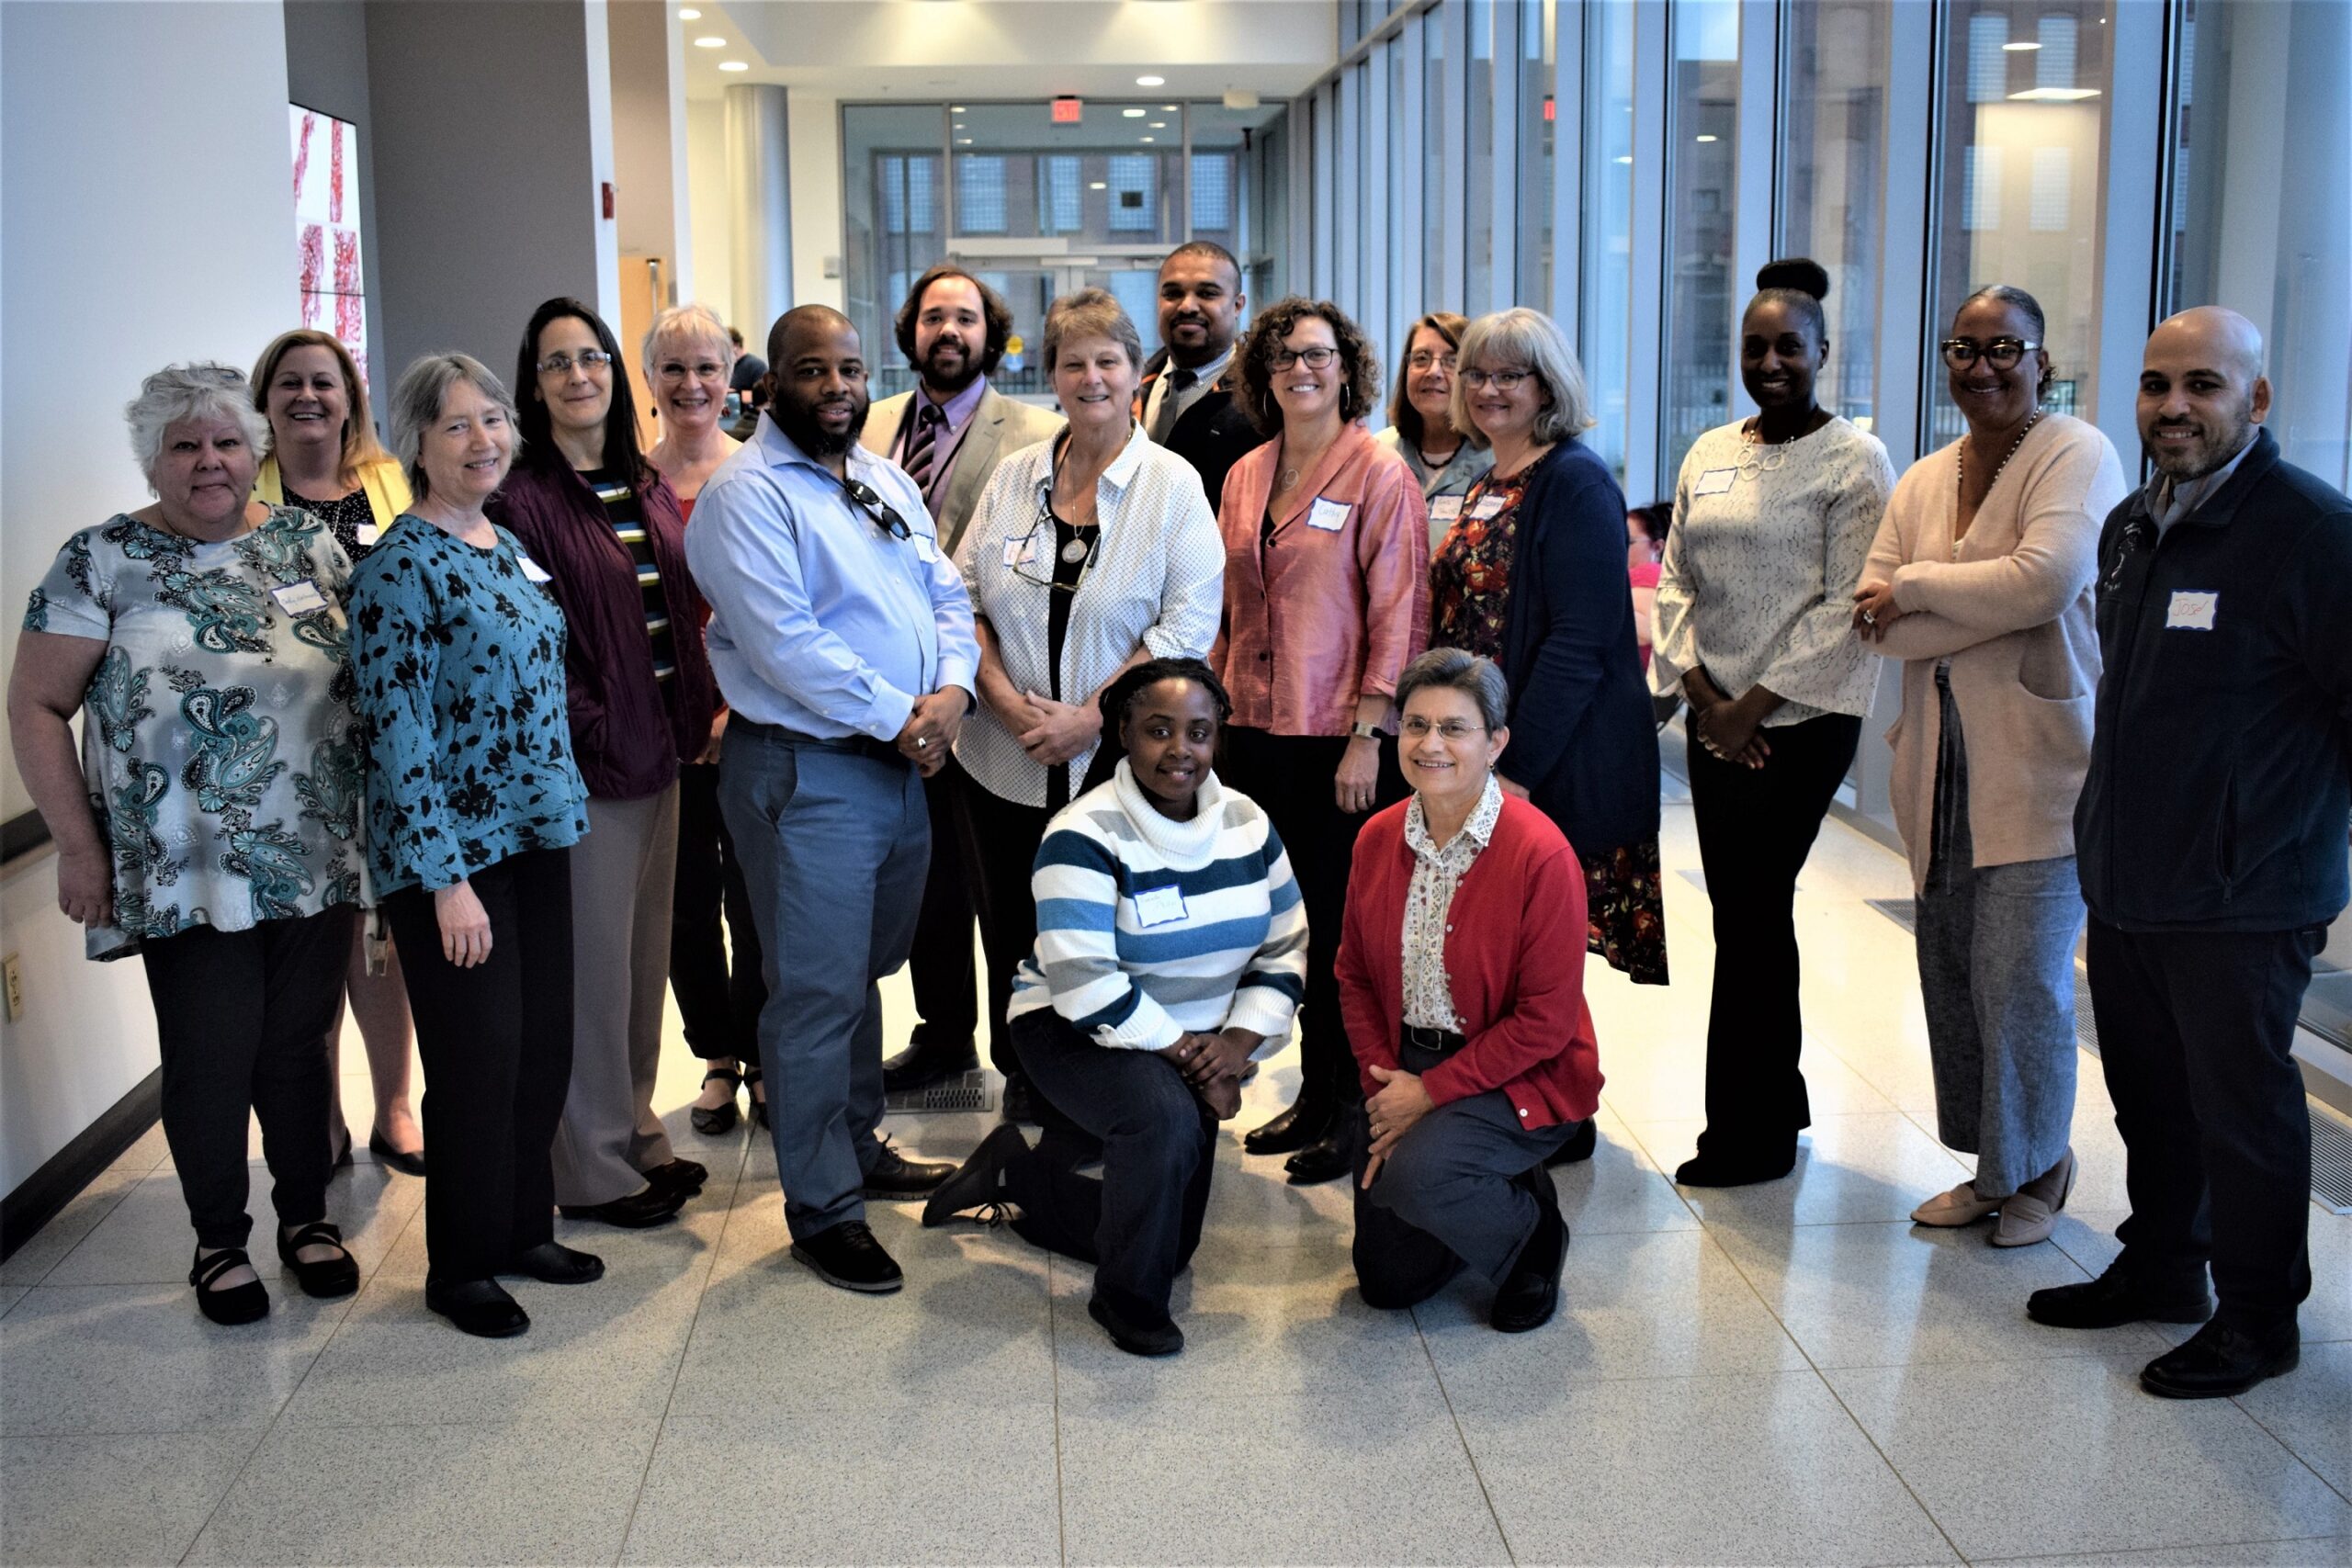 Career Centeri Driector Teri Anderson with Paradigm Shift Participants June 2019 with Five College, Inc.'s Paradigm Shift Participants